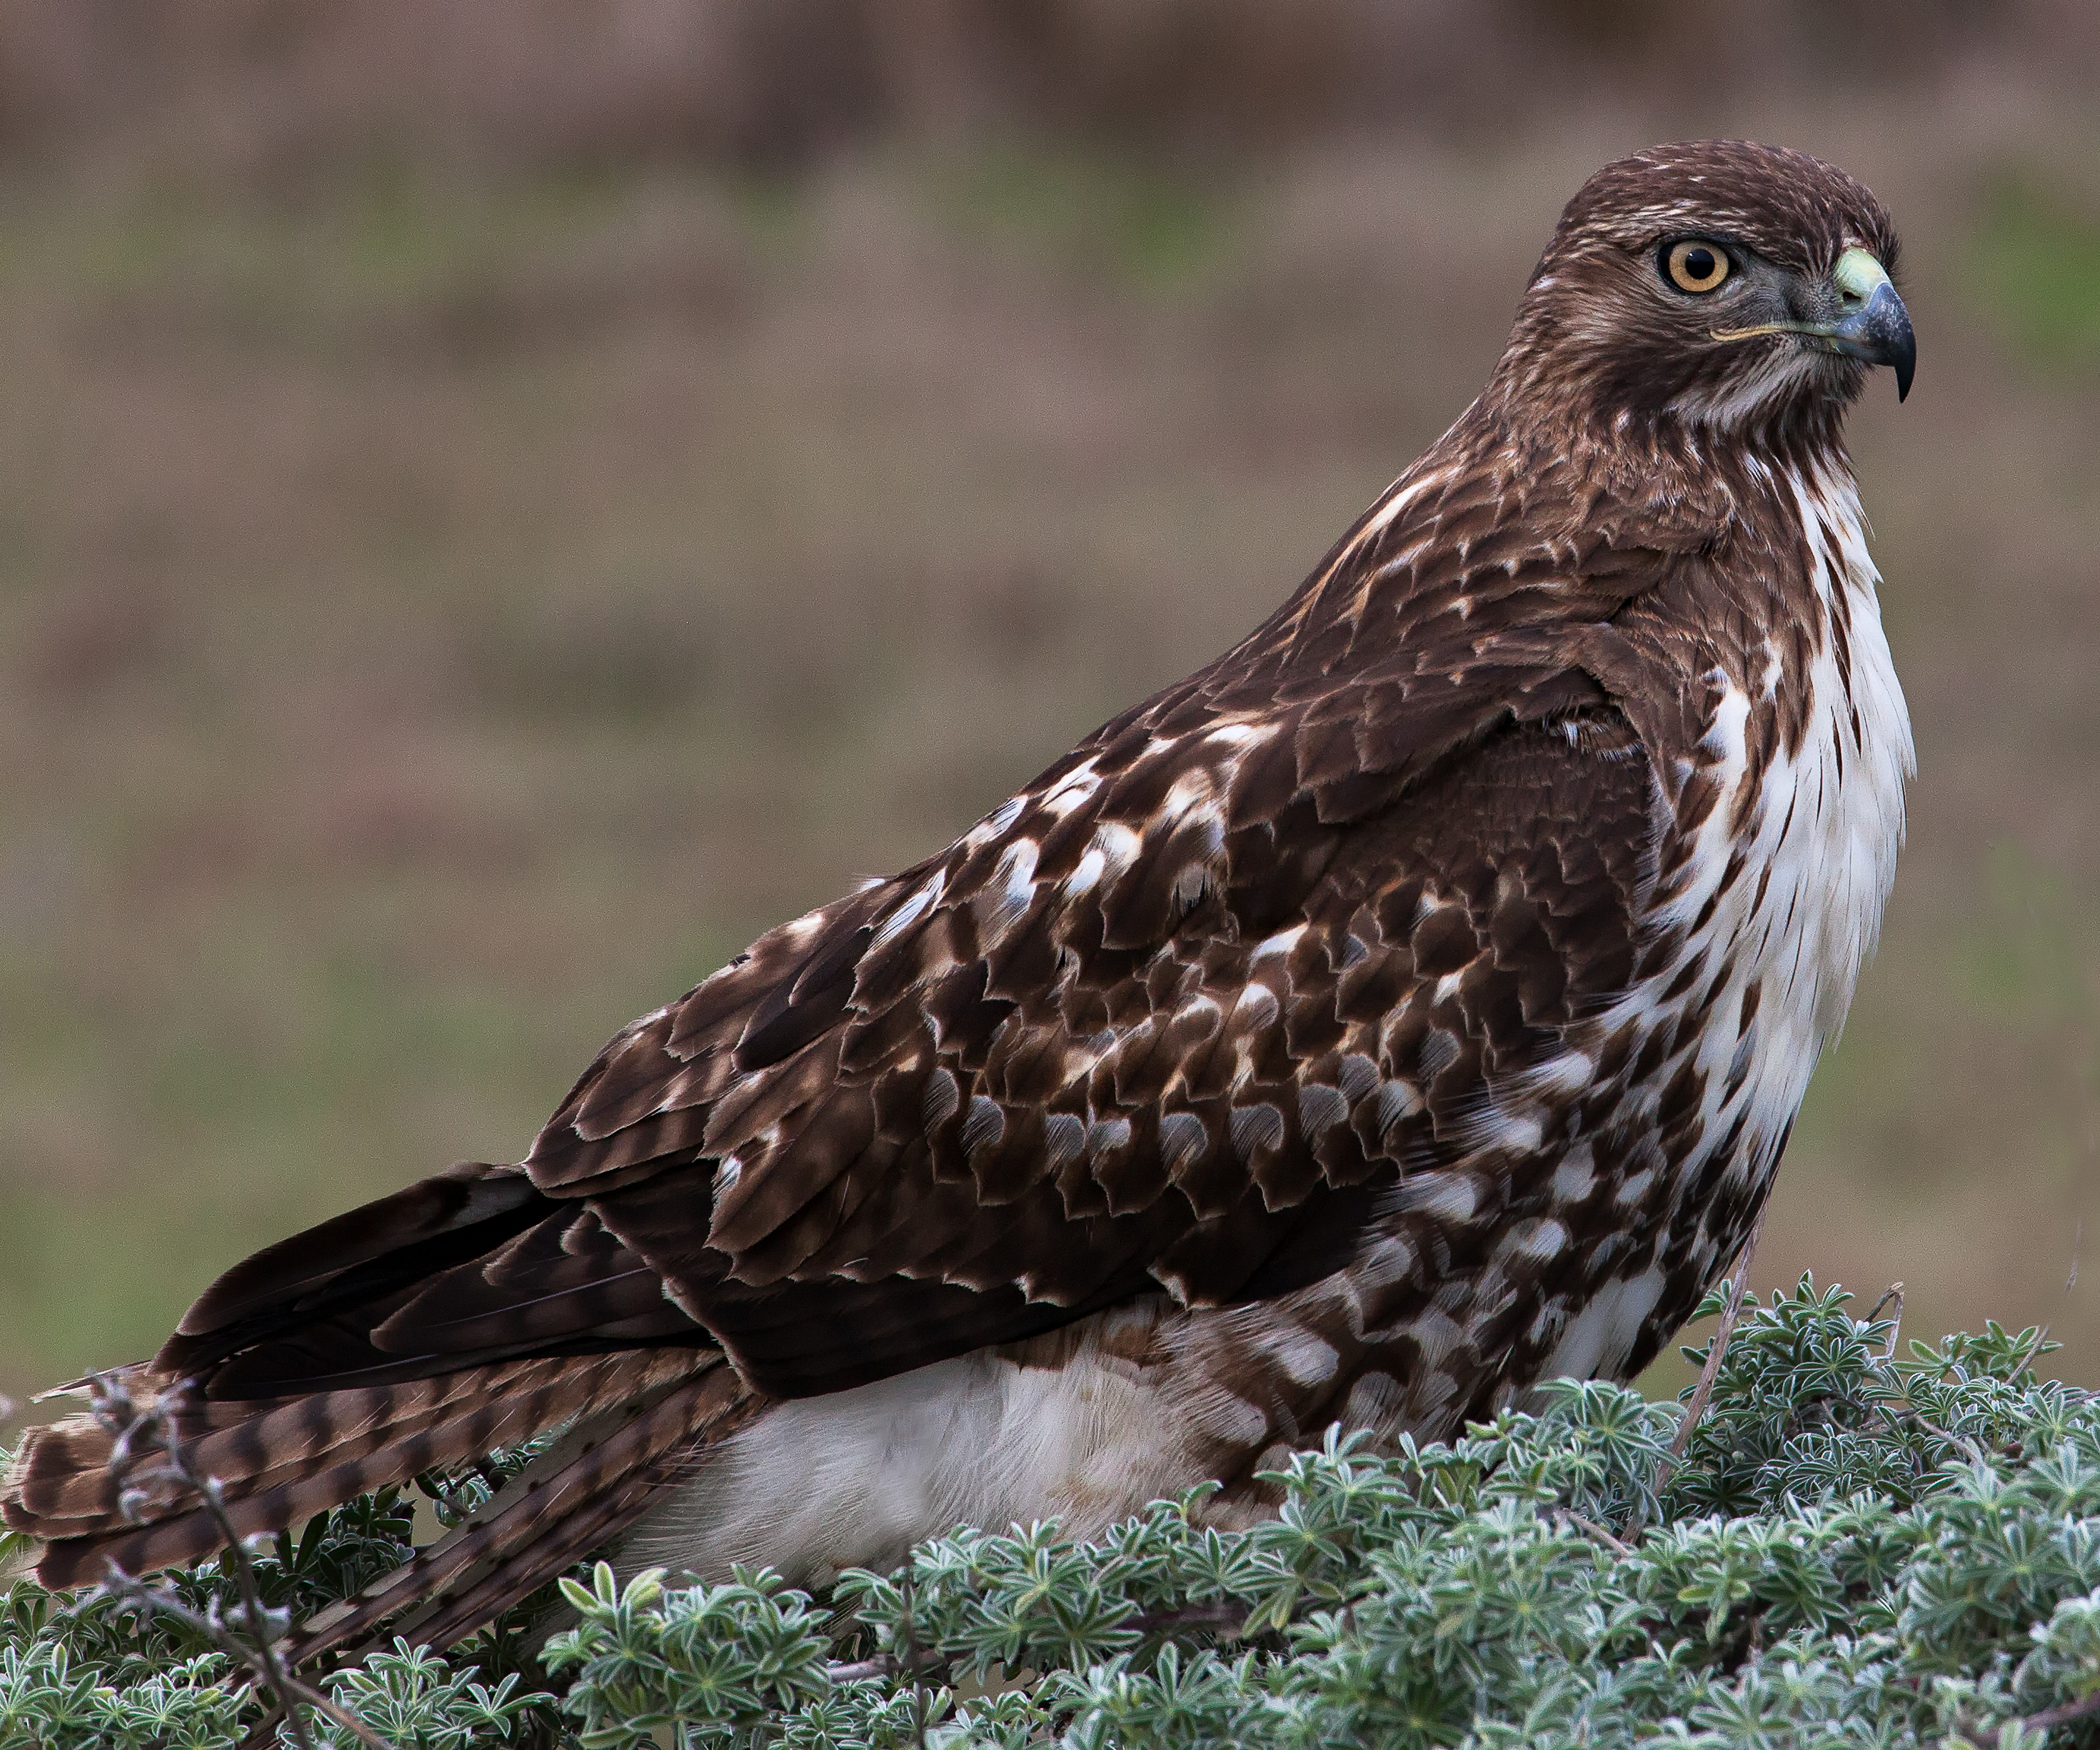 "Red Tailed Hawk